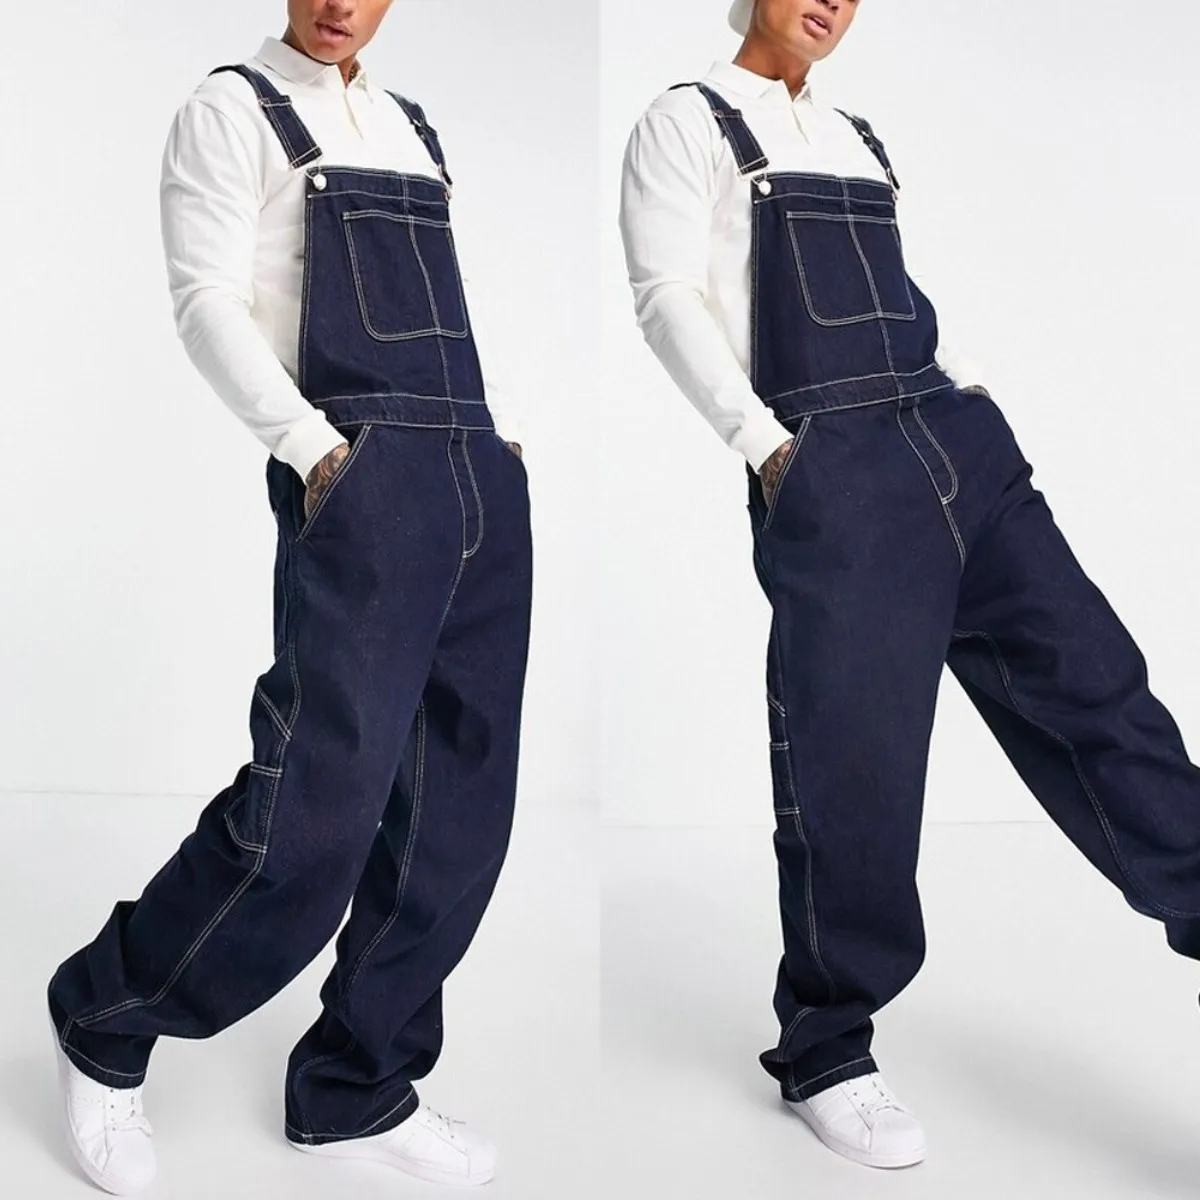 

Men Jeans Distressed Denim Overalls Straight Pants Spliced Pockets High Street Loose Cargo Washing Ankle Length Solid Casual